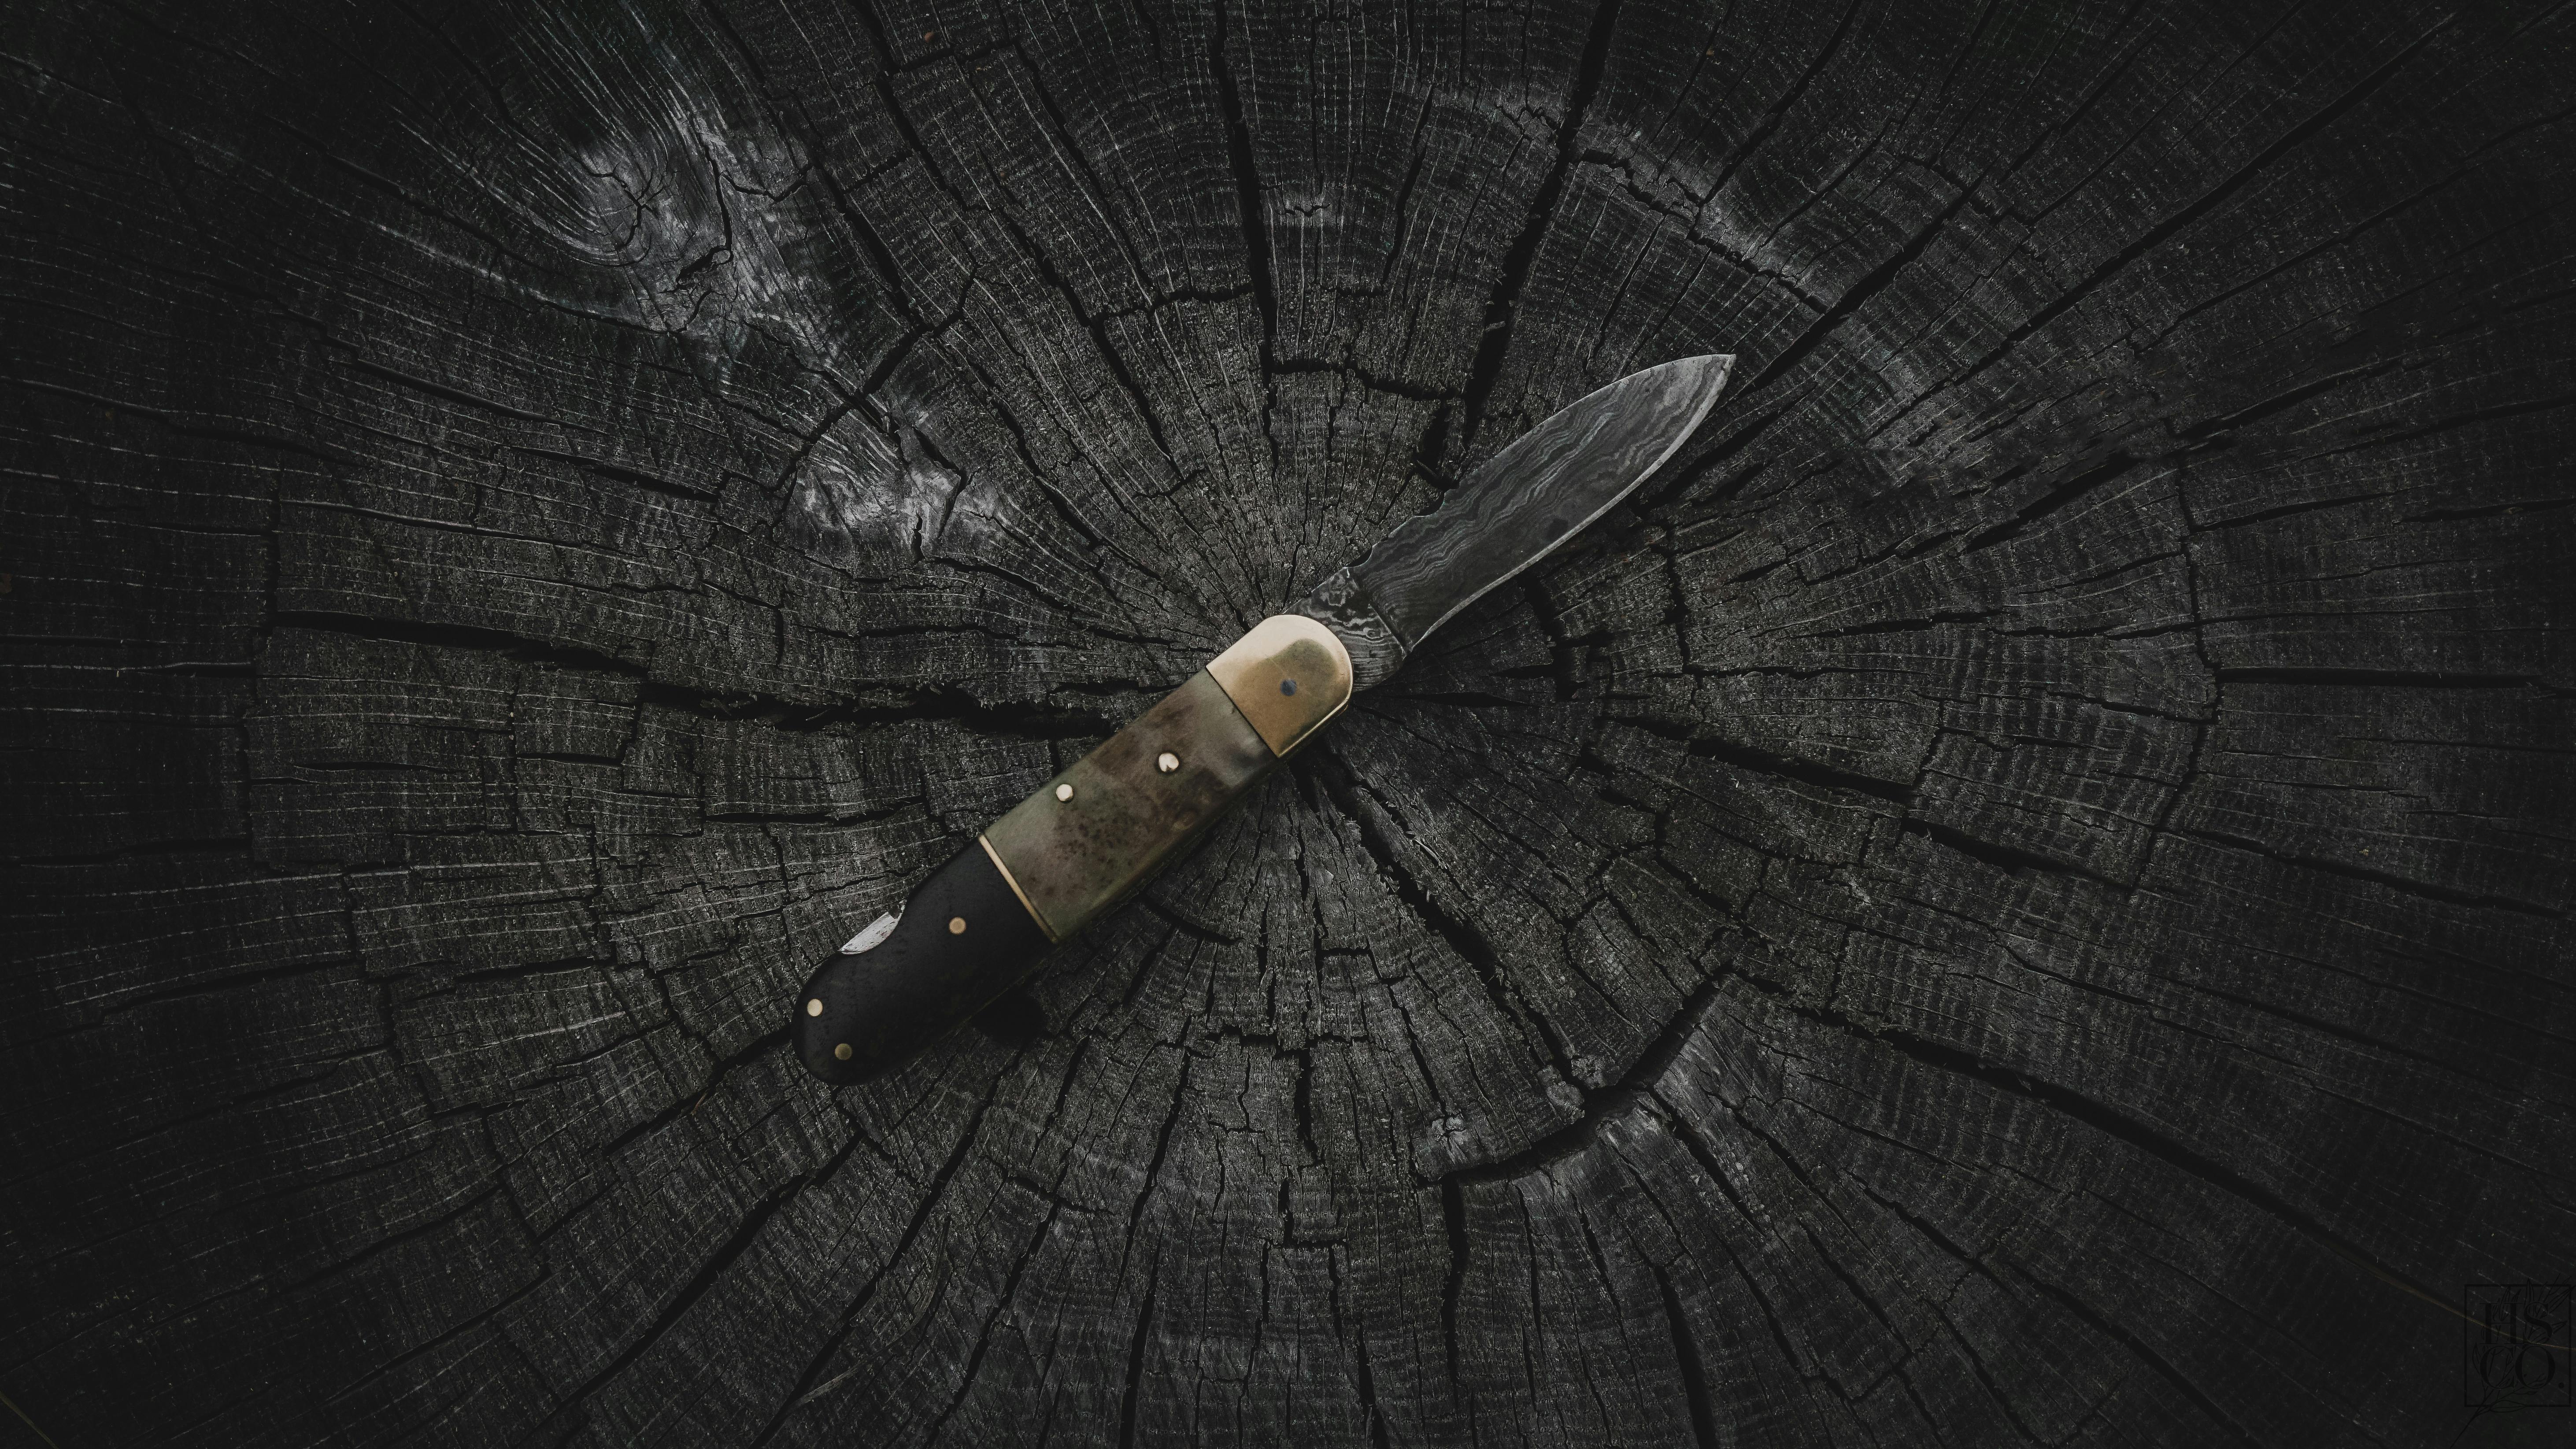 350 Knife Pictures HD  Download Free Images on Unsplash